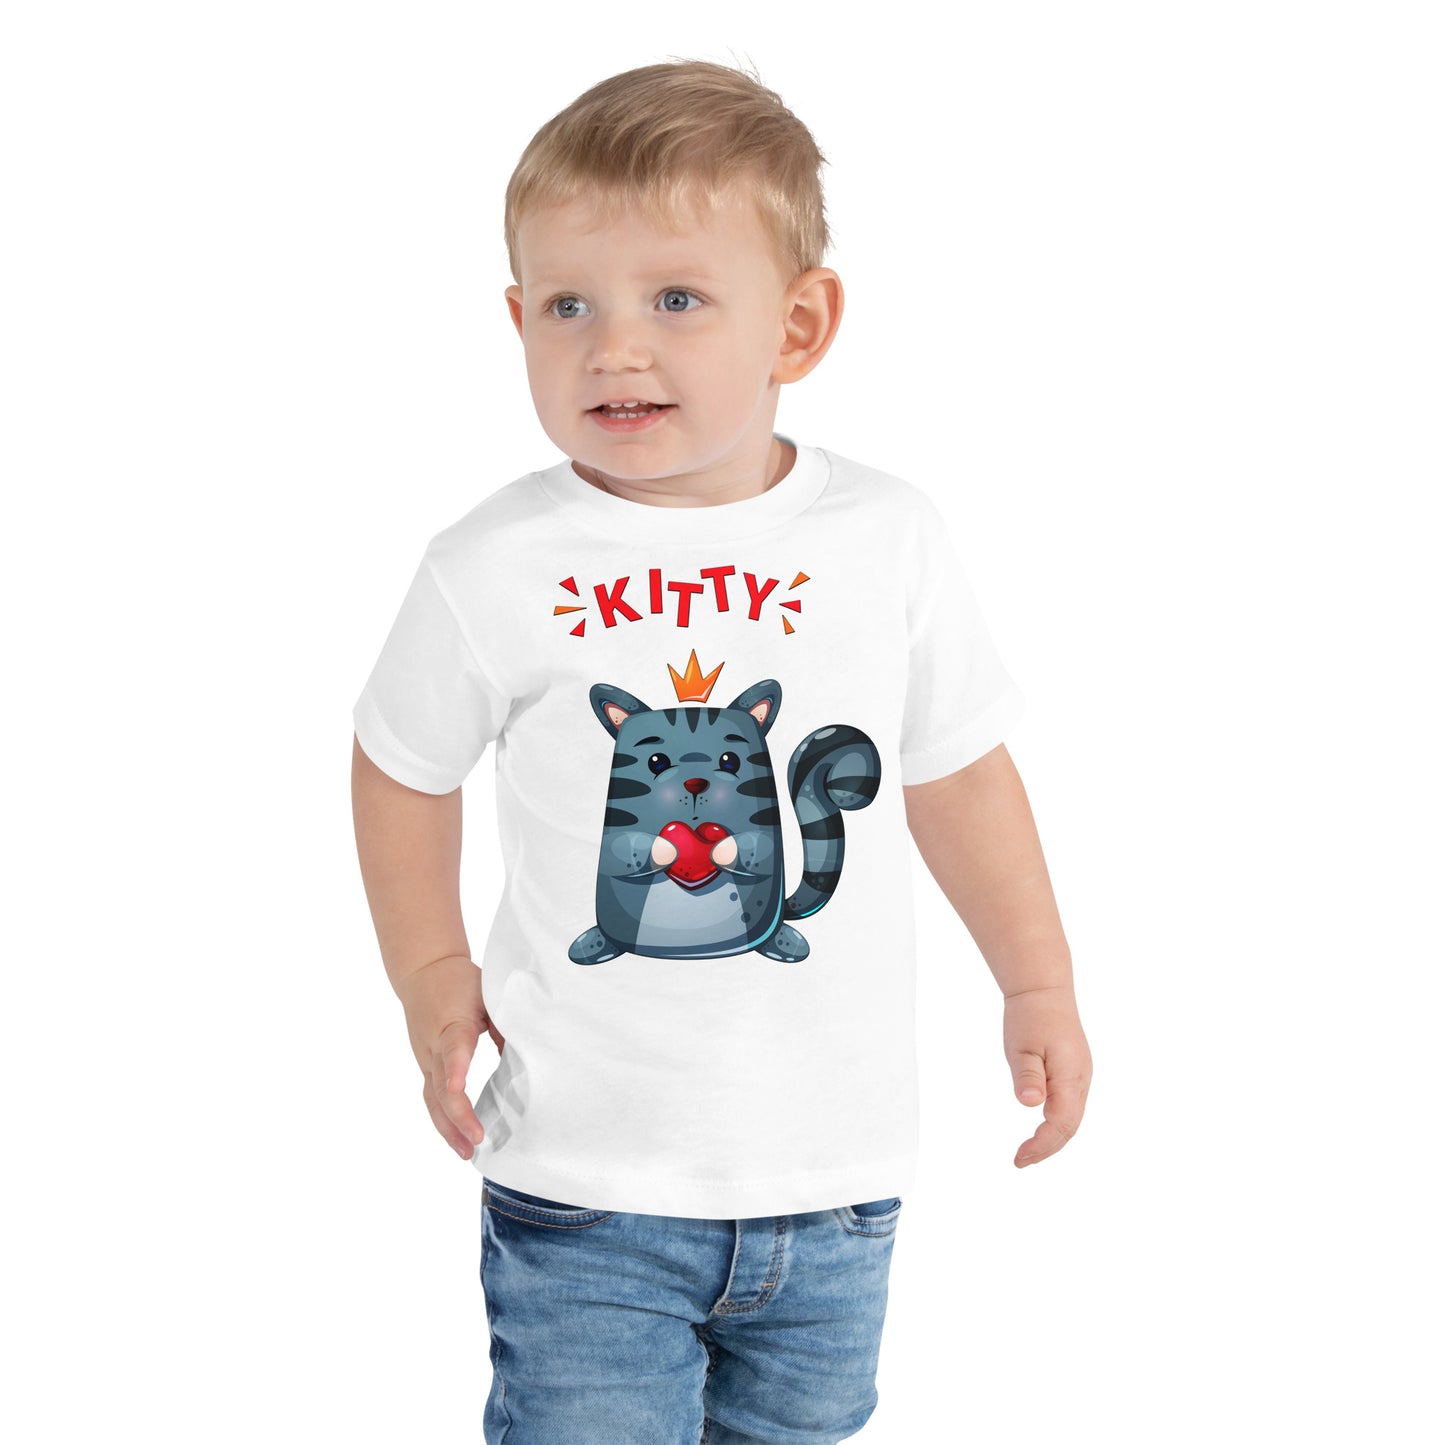 Cute Kitty Cat with Red Heart T-shirt, No. 0332